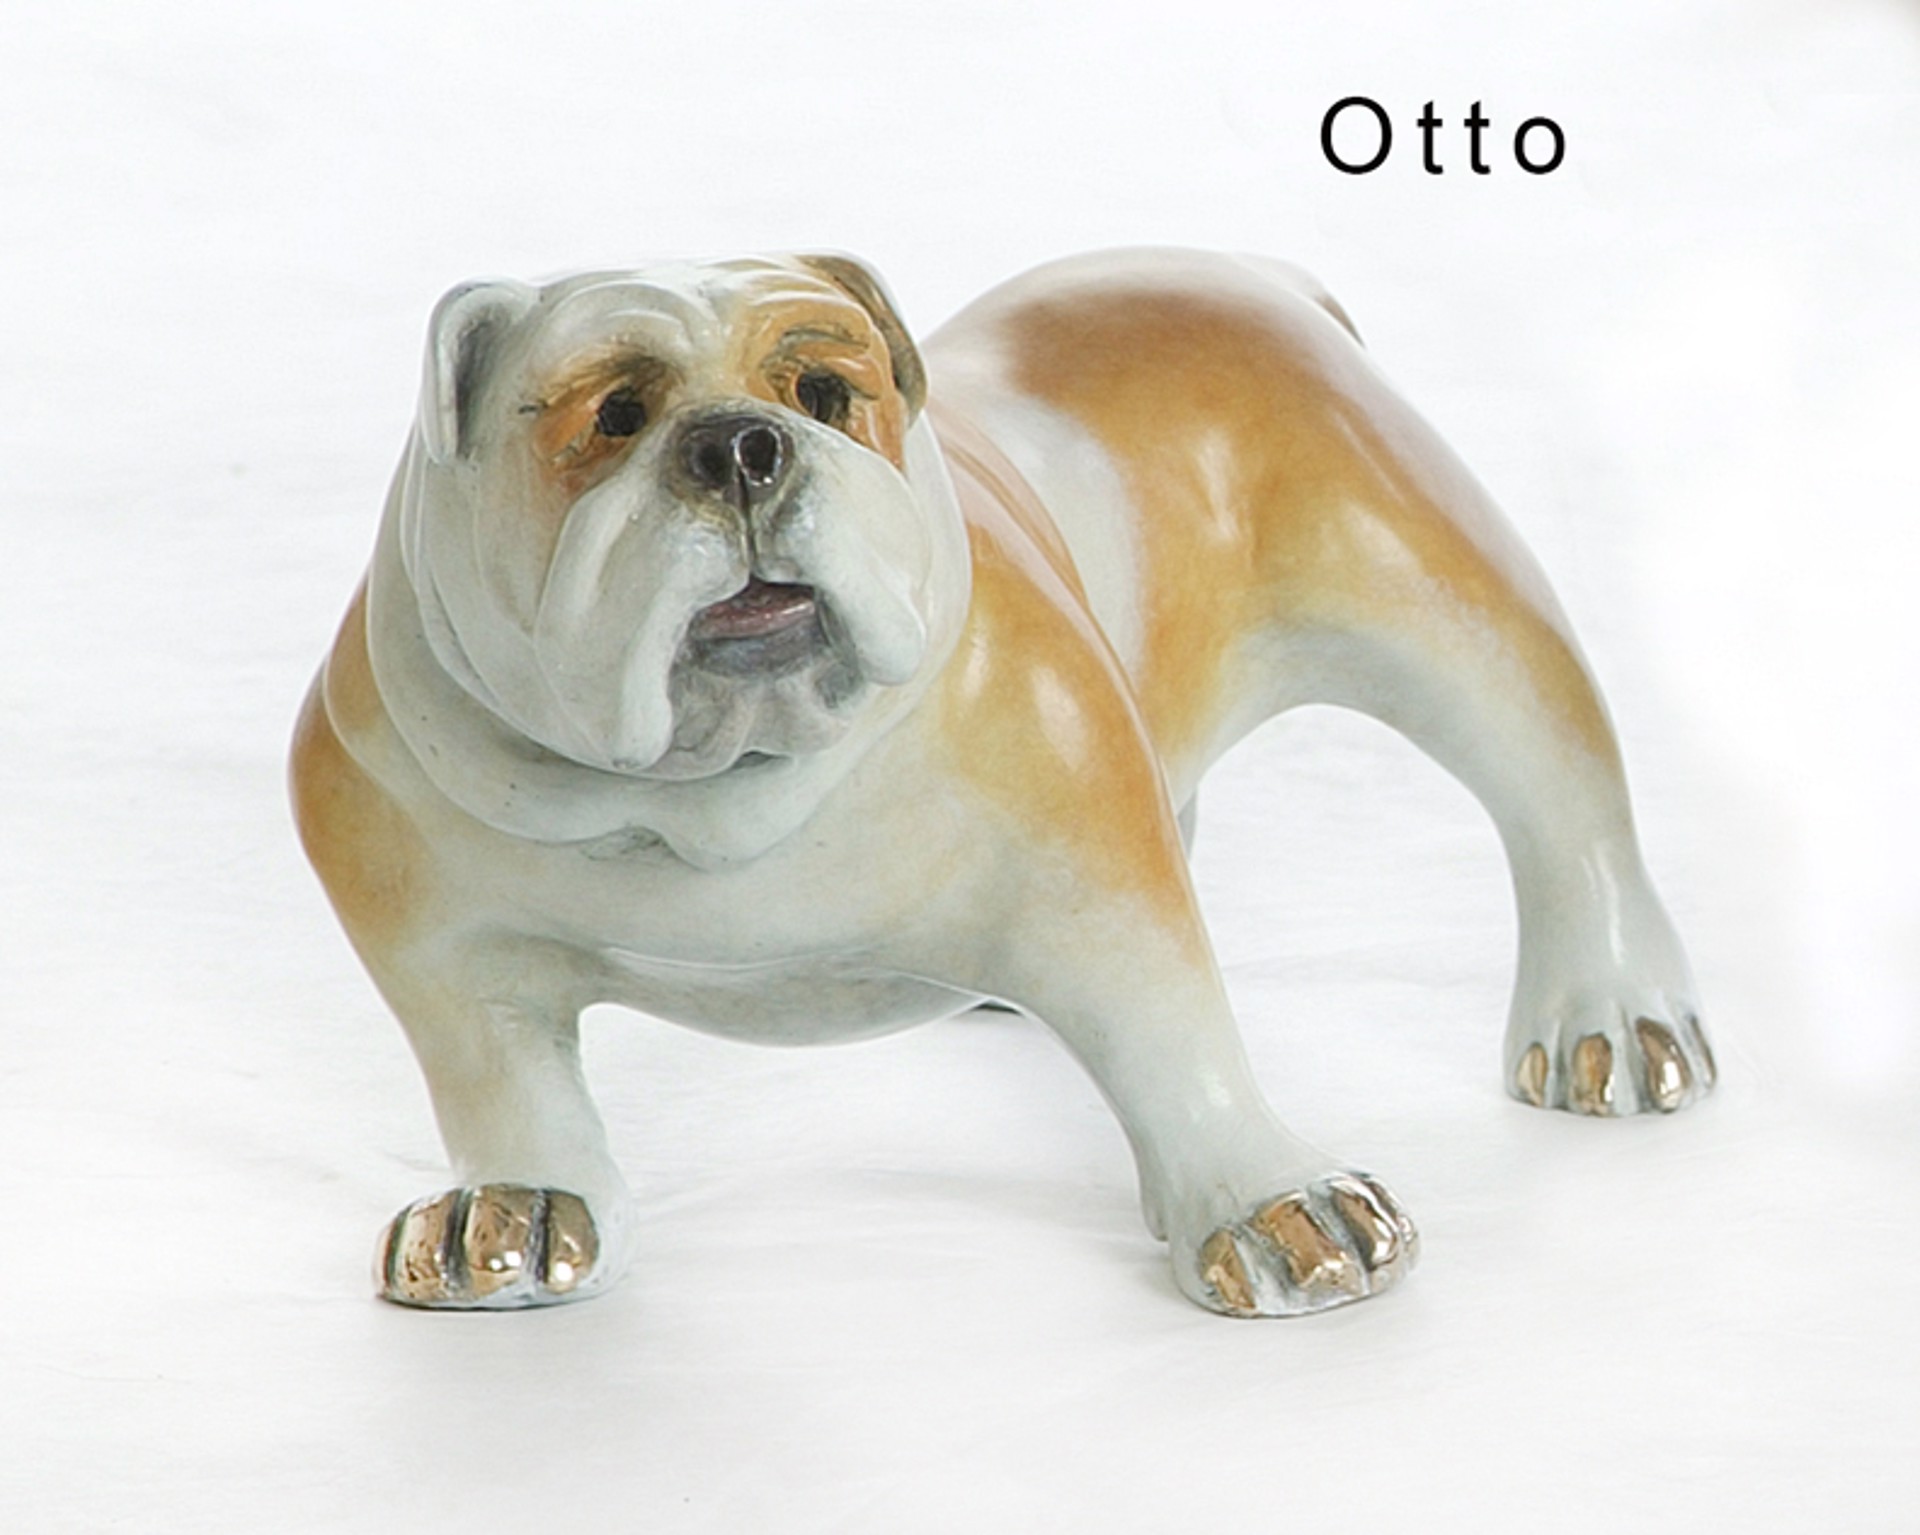 Otto by Marty Goldstein